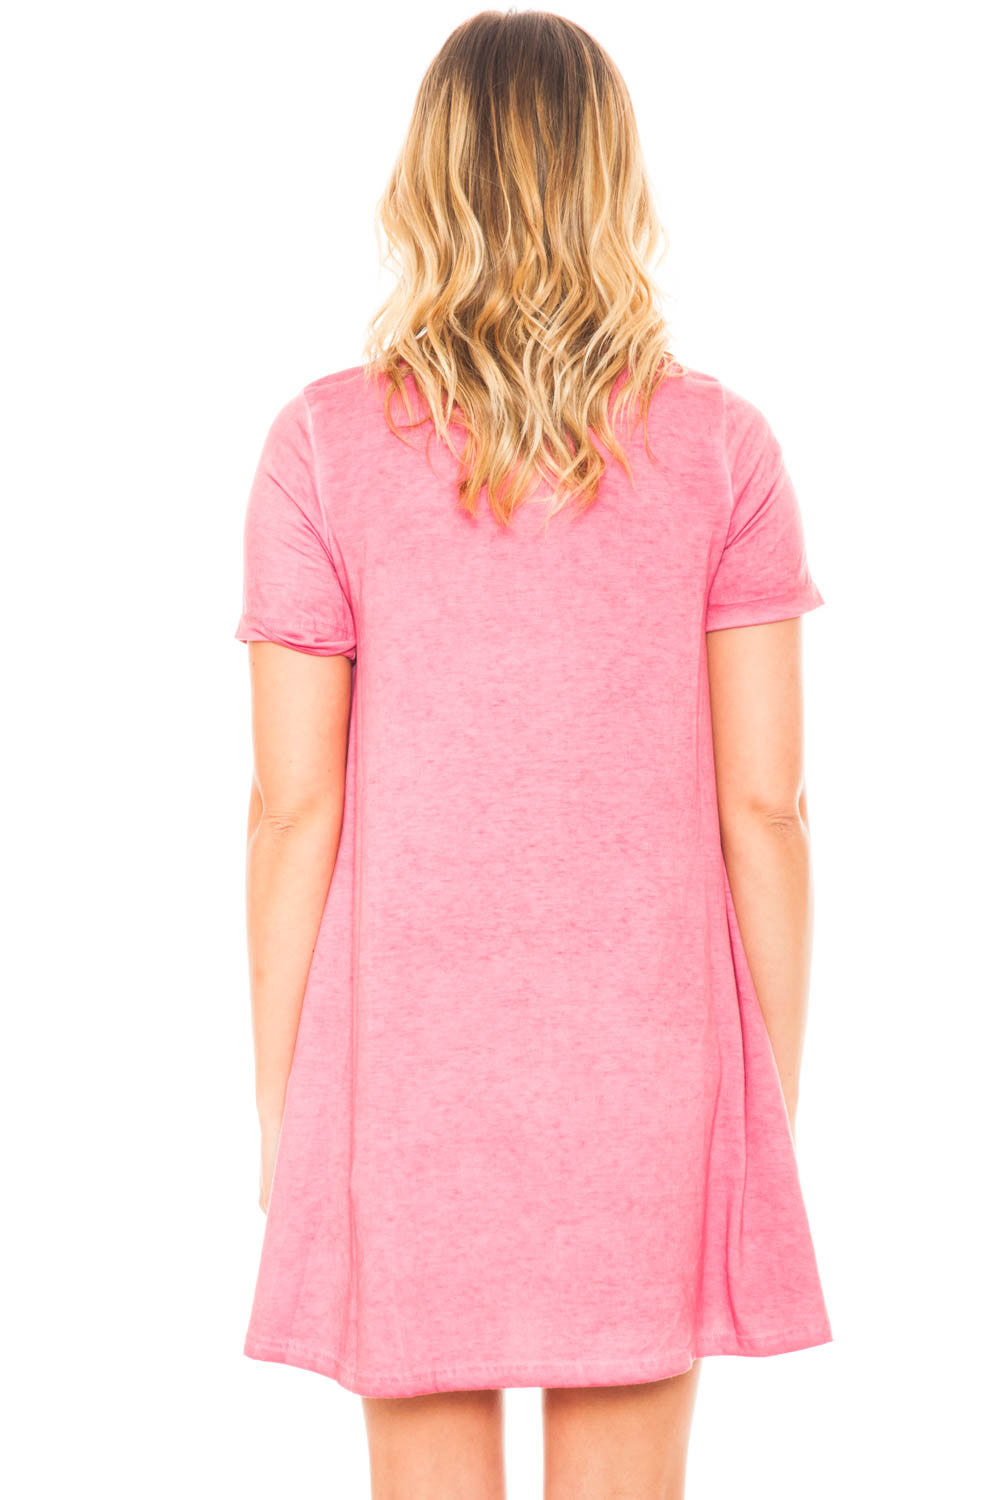 Dress - Casual T-shirt Dress with Pockets